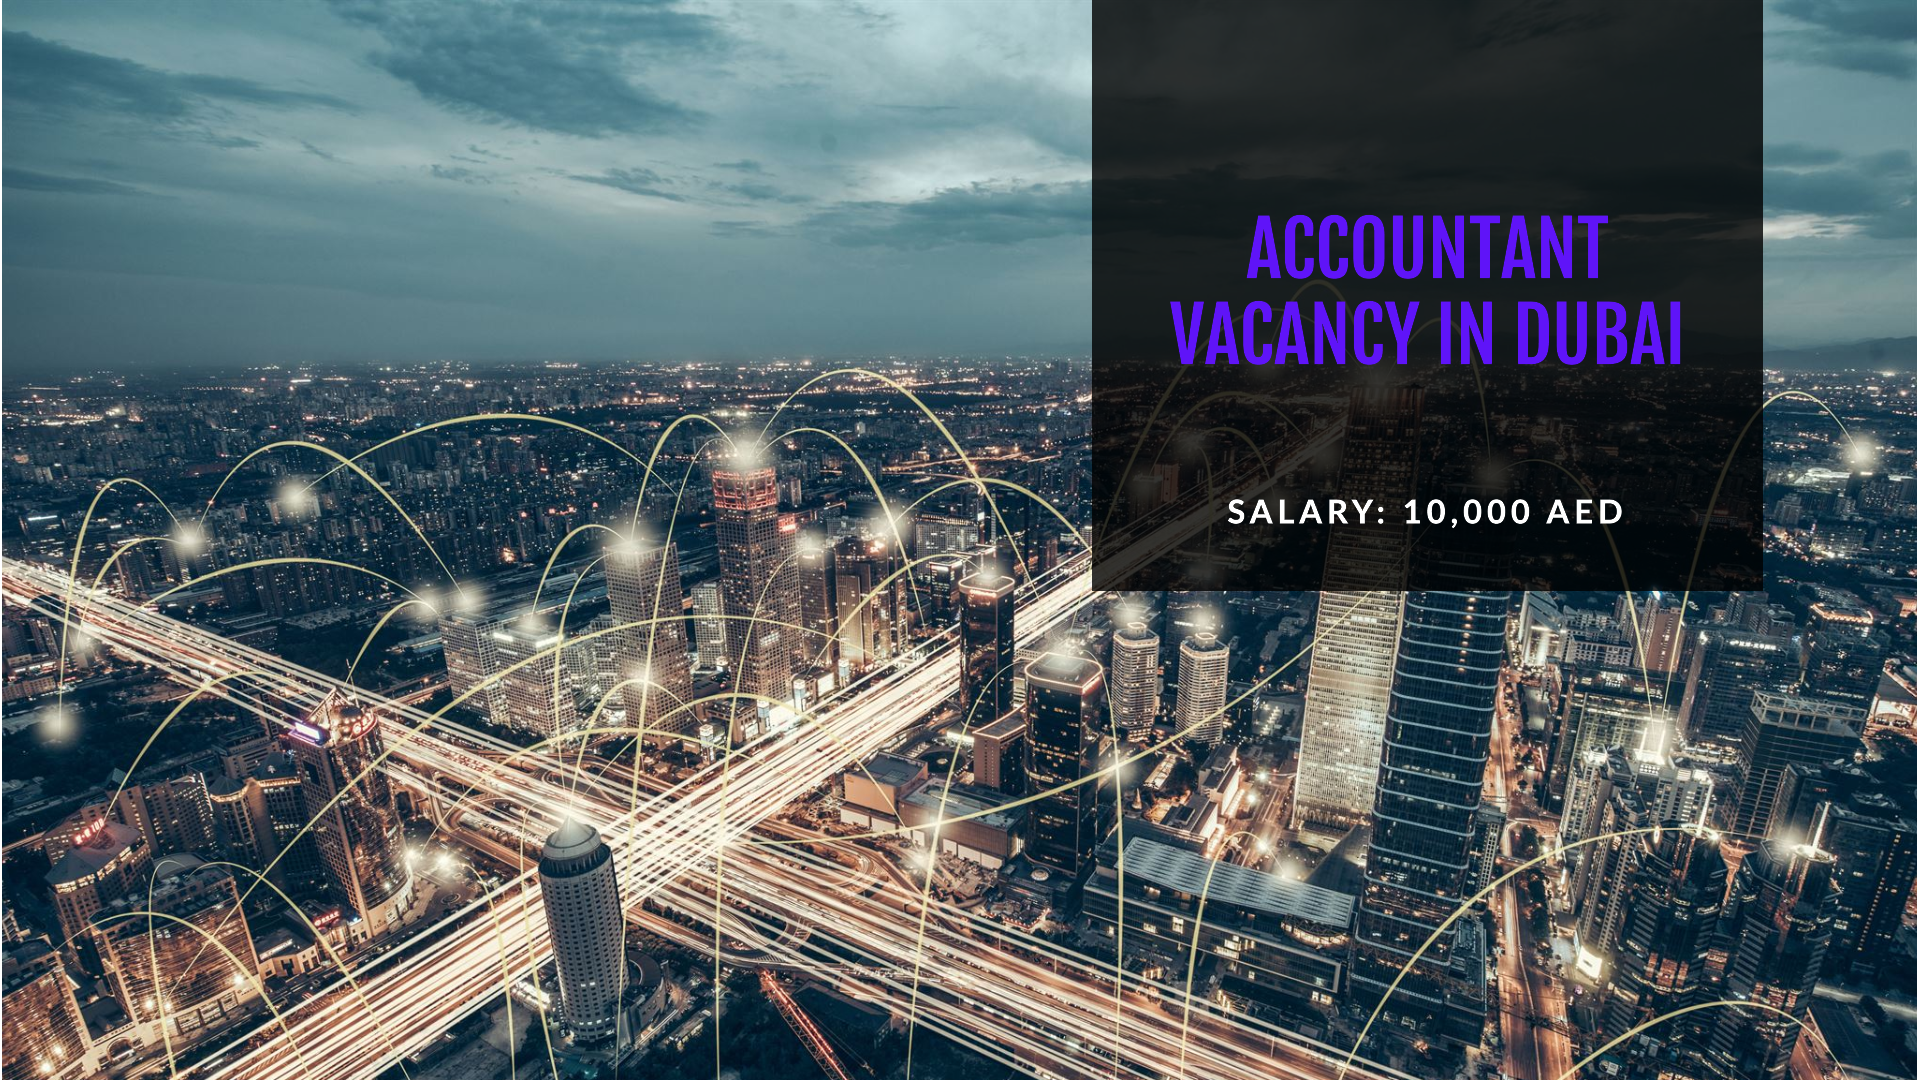 Accountant vacancy in Dubai with salary 10,000 AED